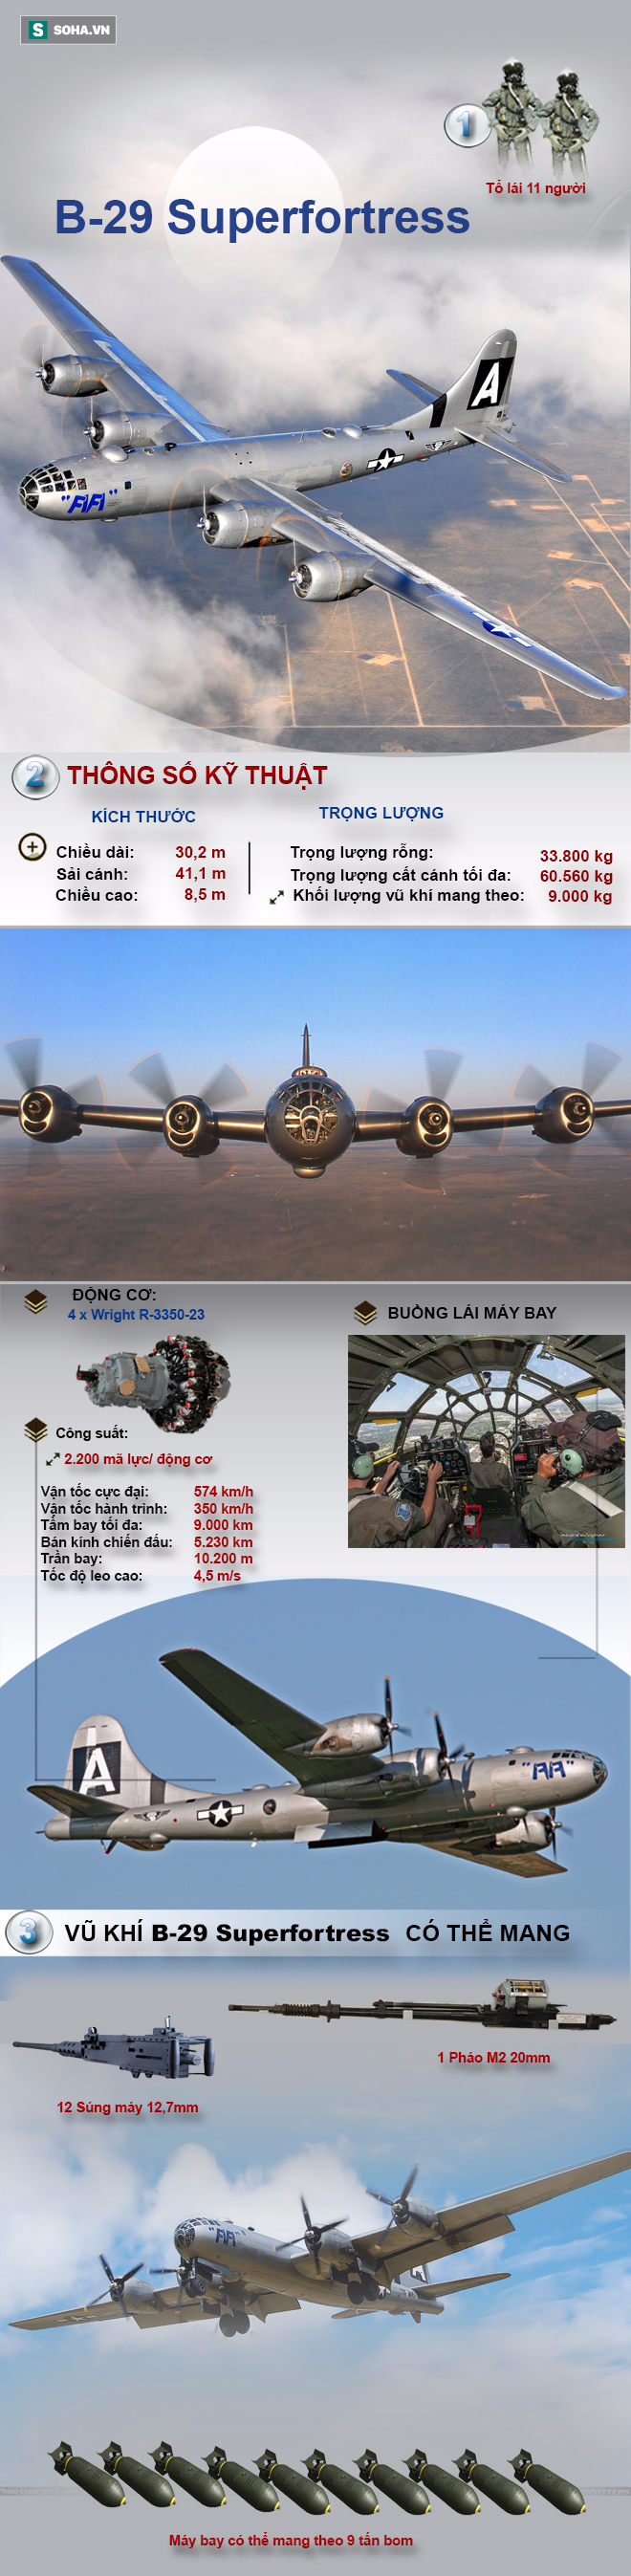 boeing-b-29-superfortress-1492317081157-1492317125